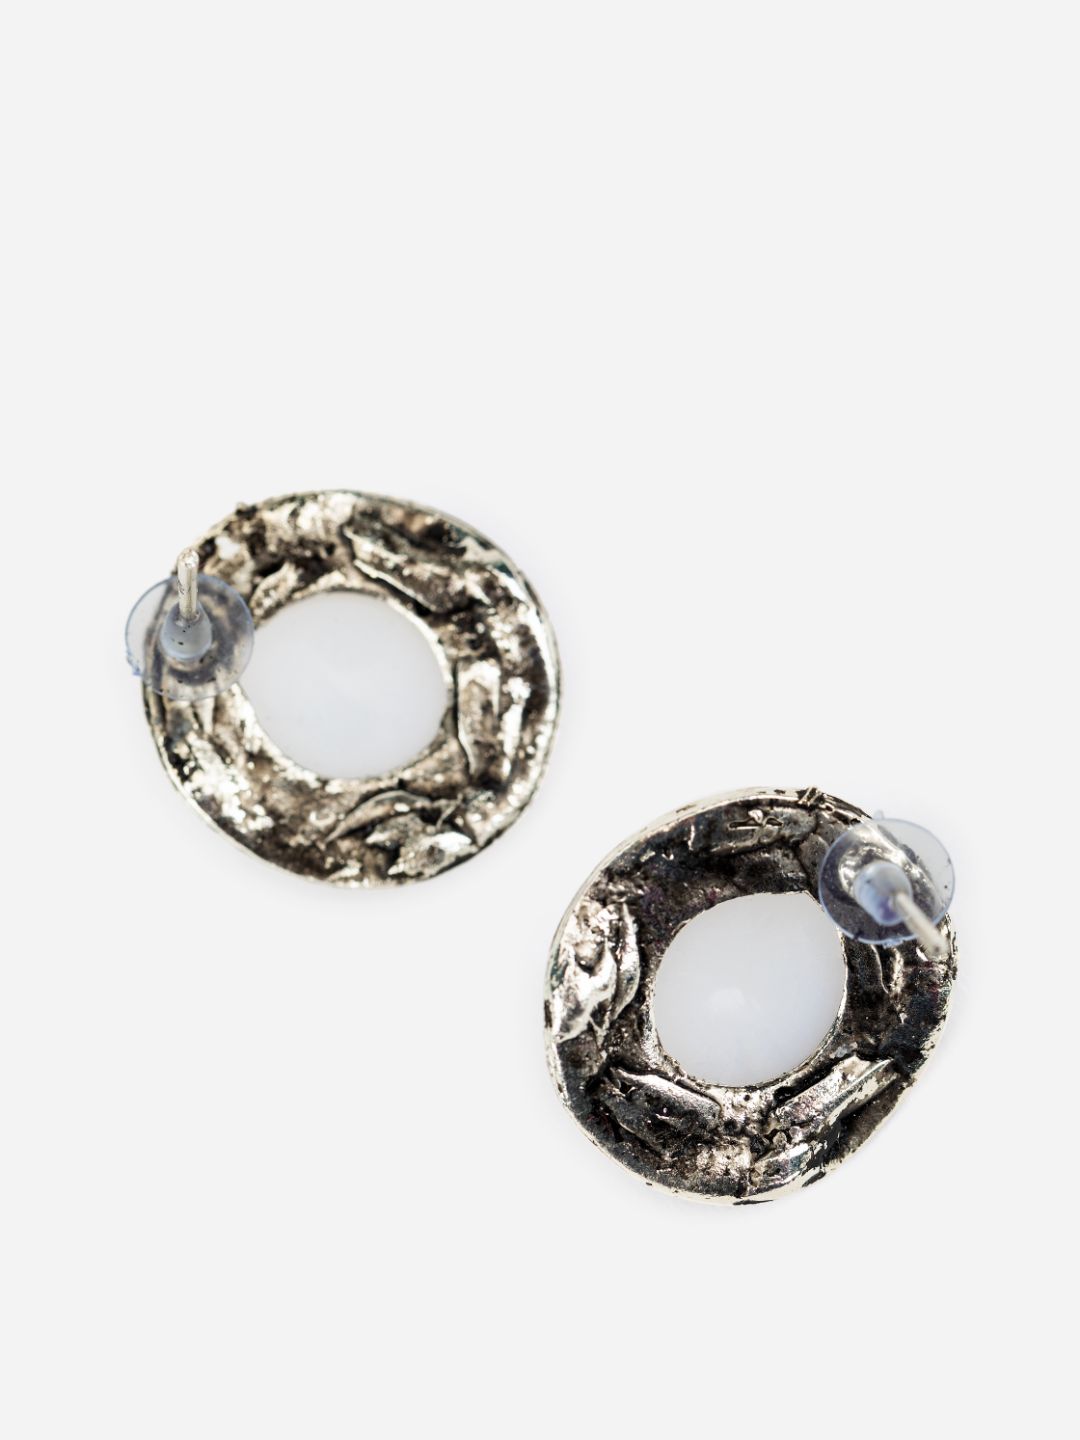 Round Embossed Pearl Studded Silver-Plated Earrings